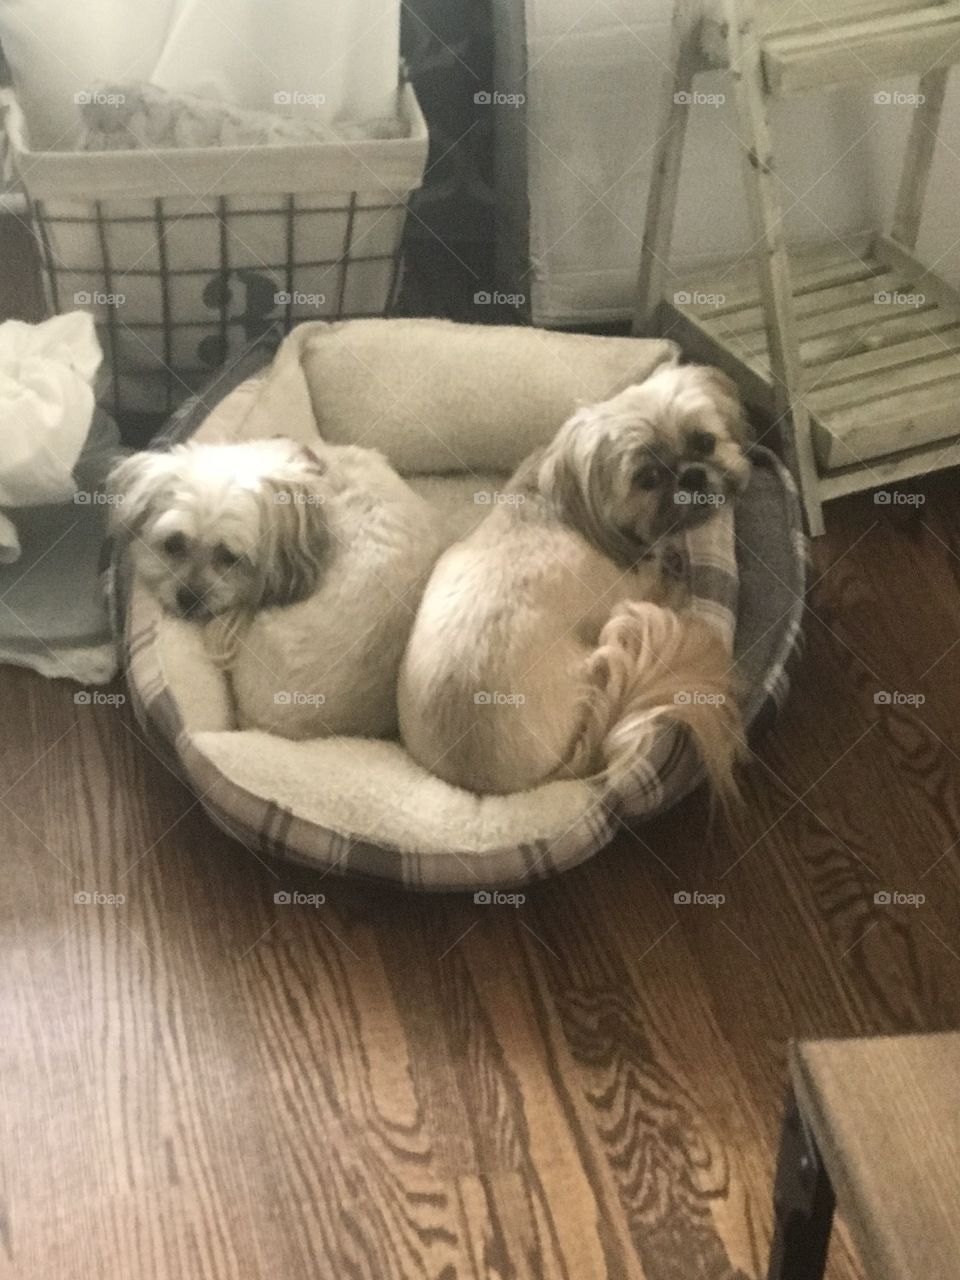 2 dogs only 1 bed